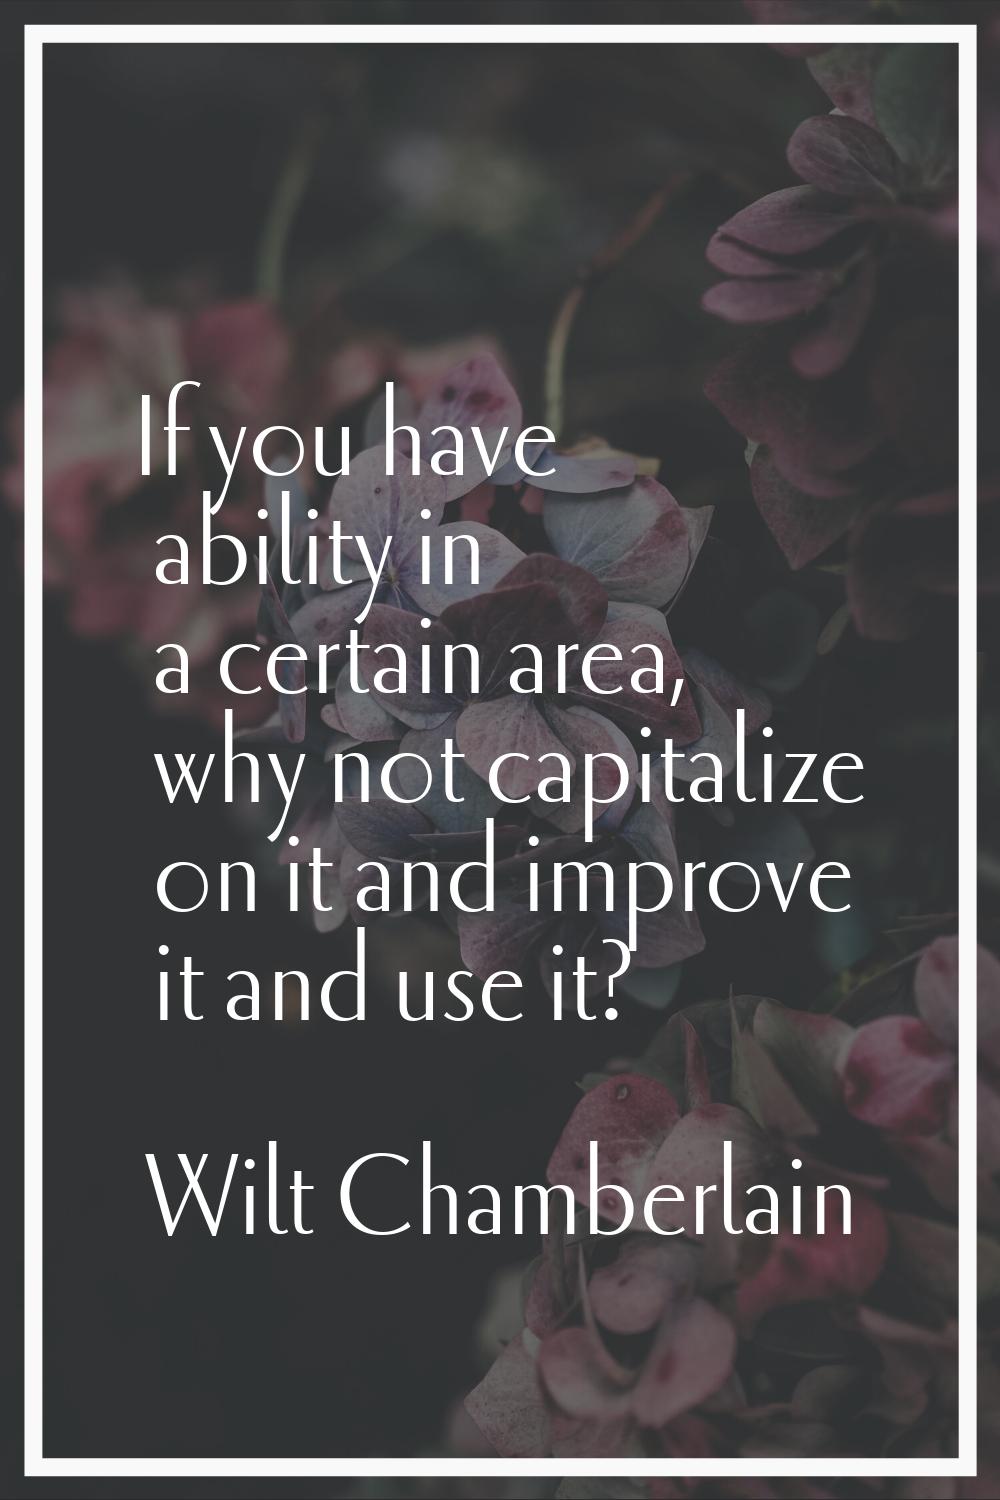 If you have ability in a certain area, why not capitalize on it and improve it and use it?